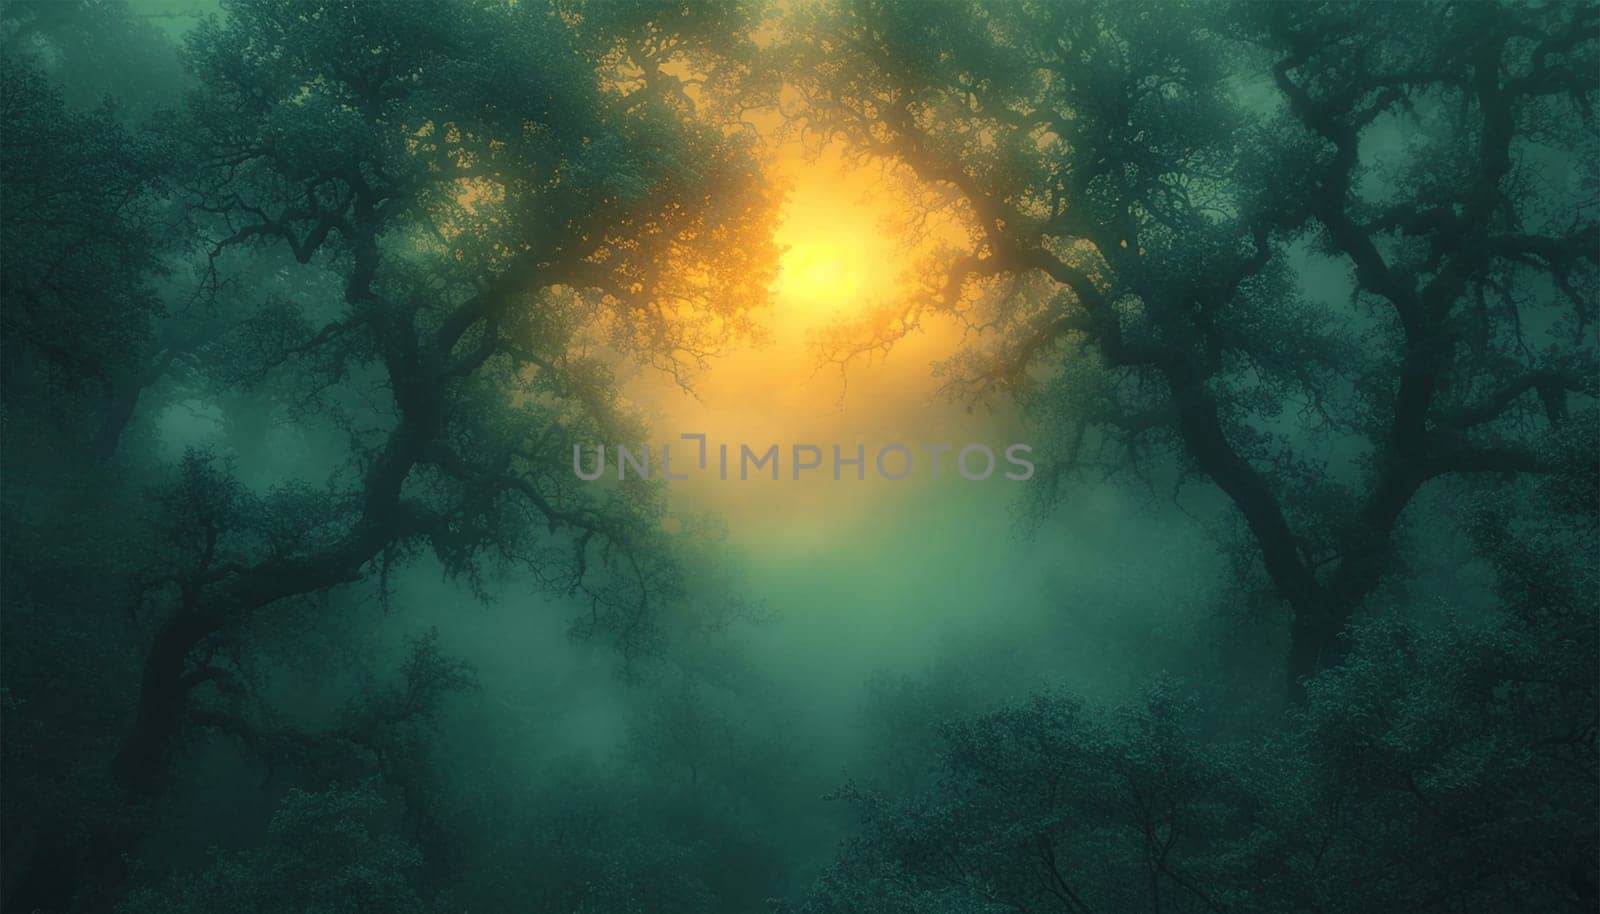 Fantasy forest. Fairy tale magical morning forest with sunlight beams. Magical particles swirl among the fantastically enchanted trees. Mystical woods. by Annebel146